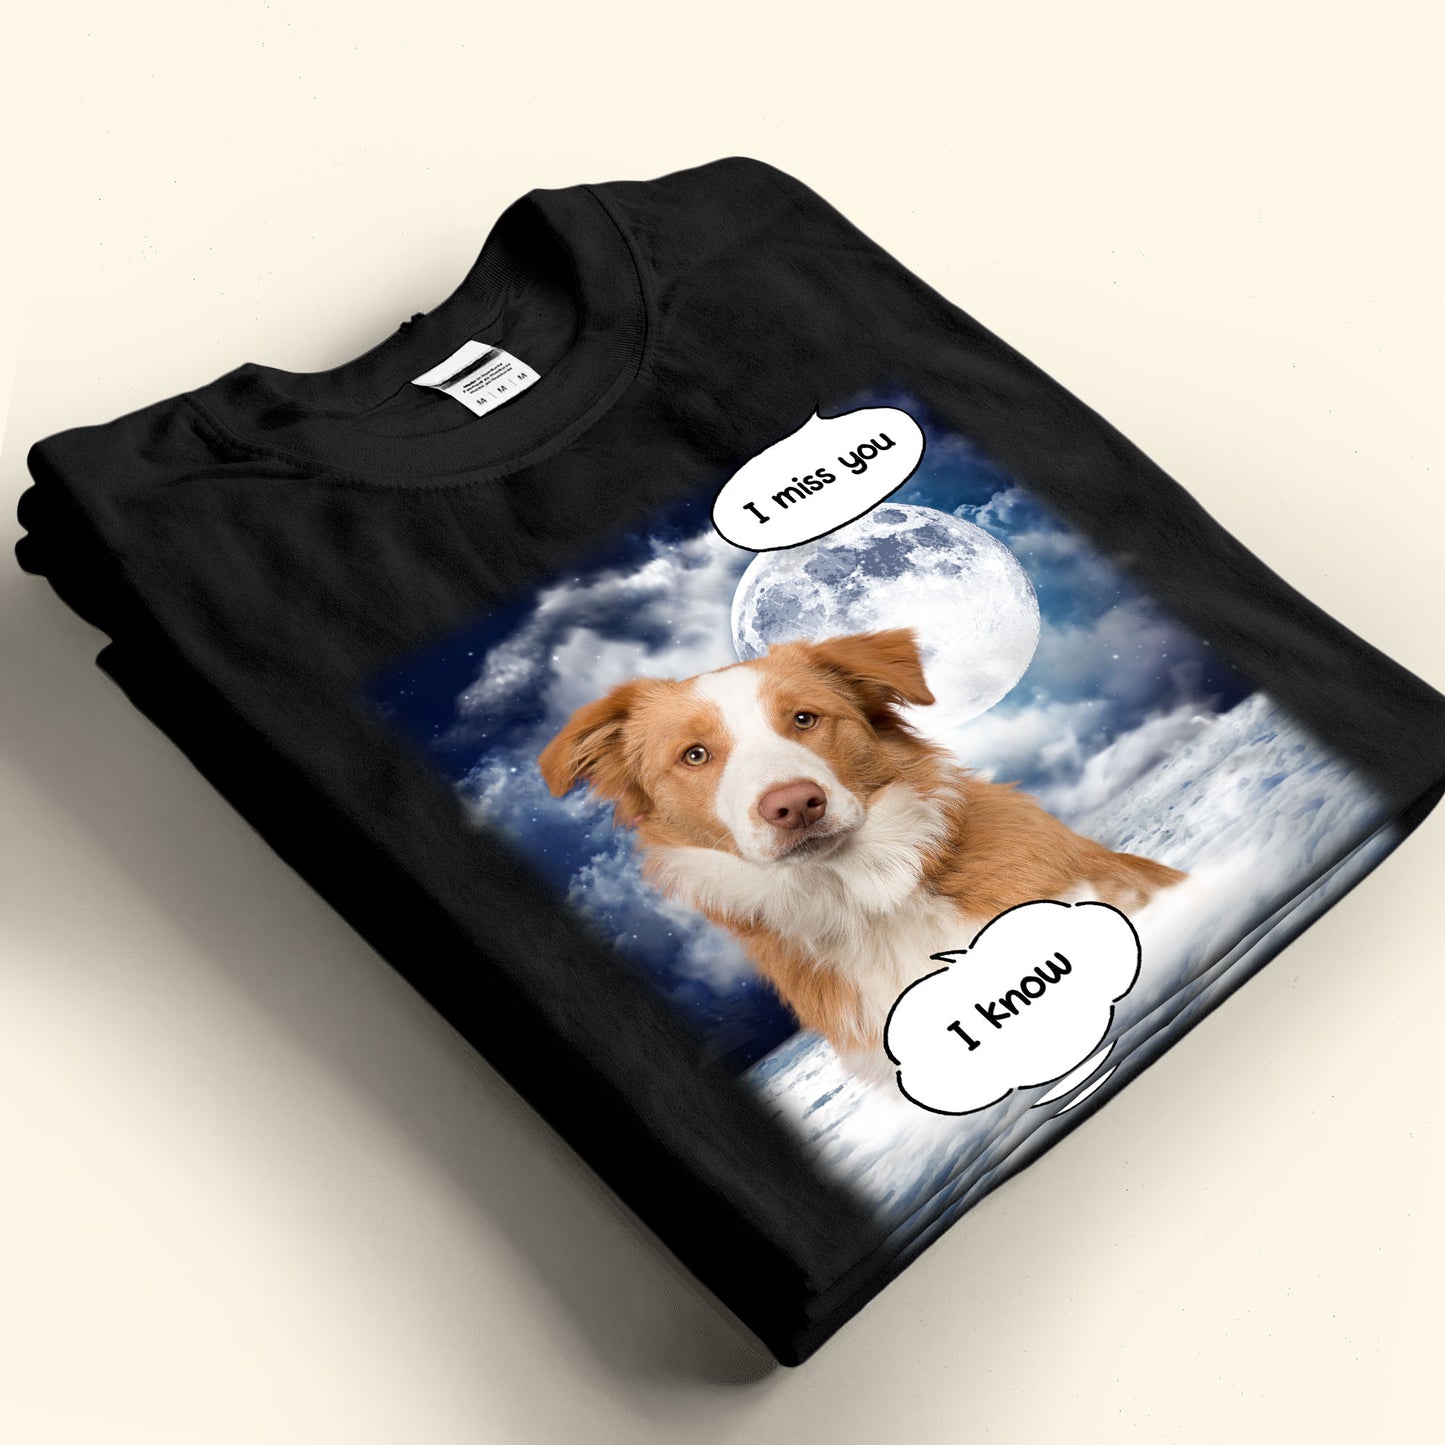 I Miss You Memorial - Personalized Photo Shirt